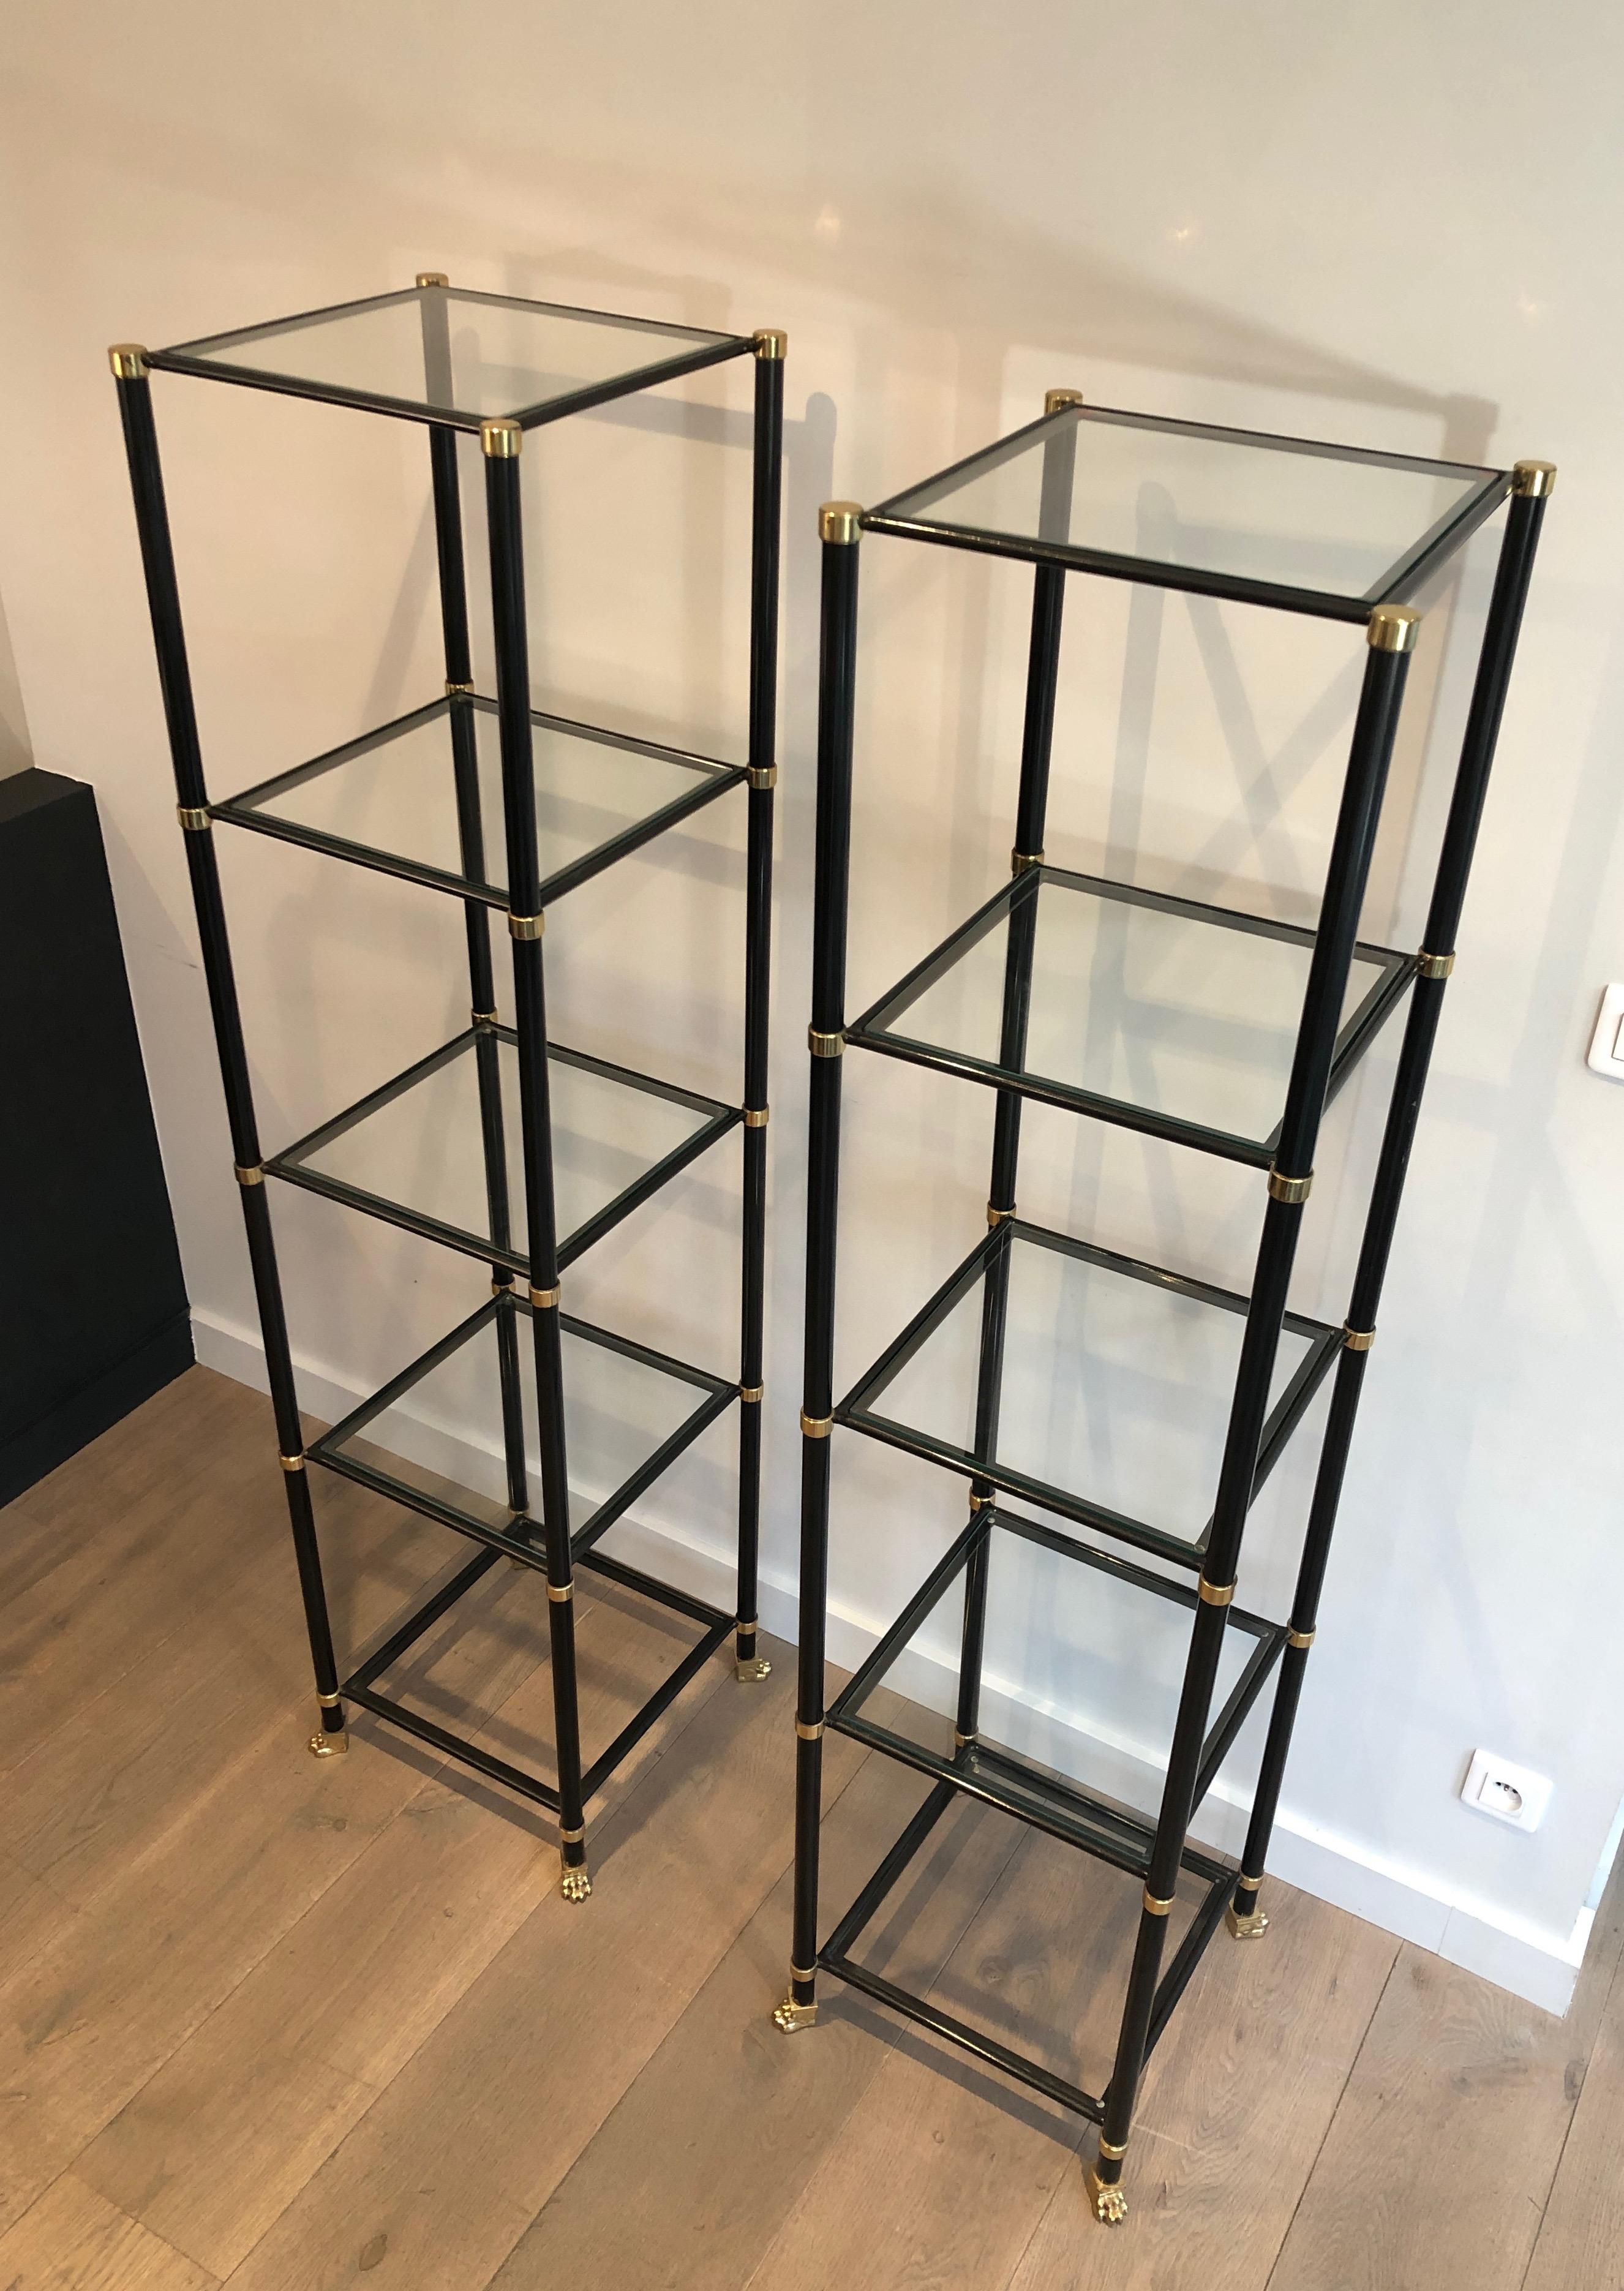 This stunning pair of shelves ar emade of black lacquered metal, brass and bronze glass shelves. The bottom legs of each vitrine has very nice bronze claw feet that are specific from the designer. This is a work by famous French designer Guy Lefevre